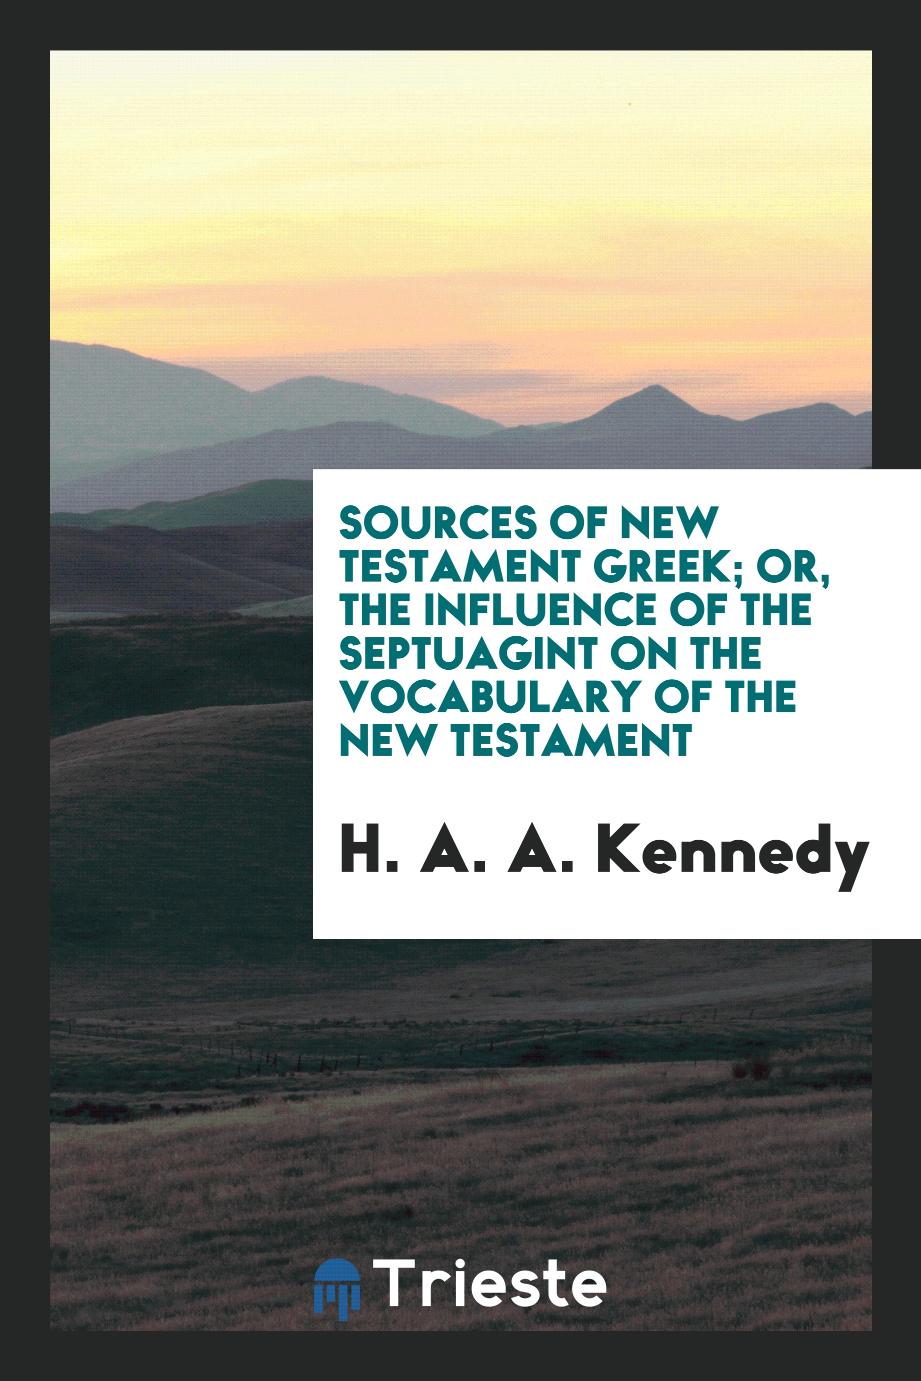 Sources of New Testament Greek; or, The influence of the Septuagint on the vocabulary of the New Testament